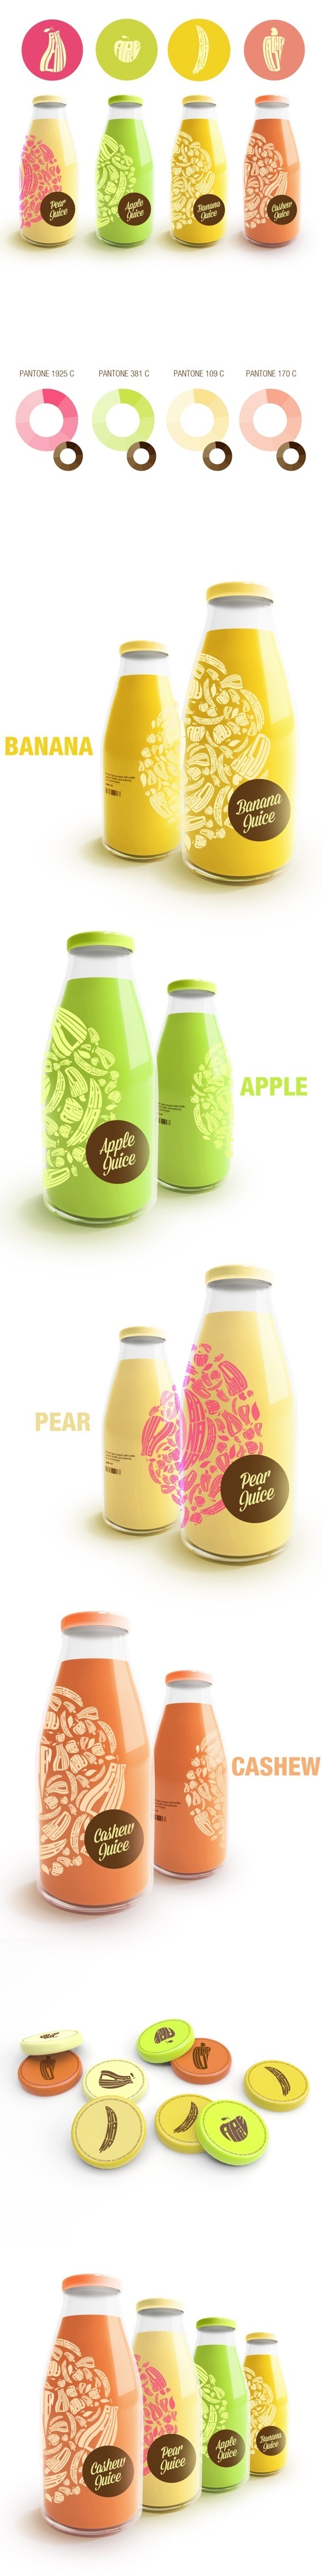 Creative Packaging, Branding, Project, Renan, and Vizzotto image ideas ...